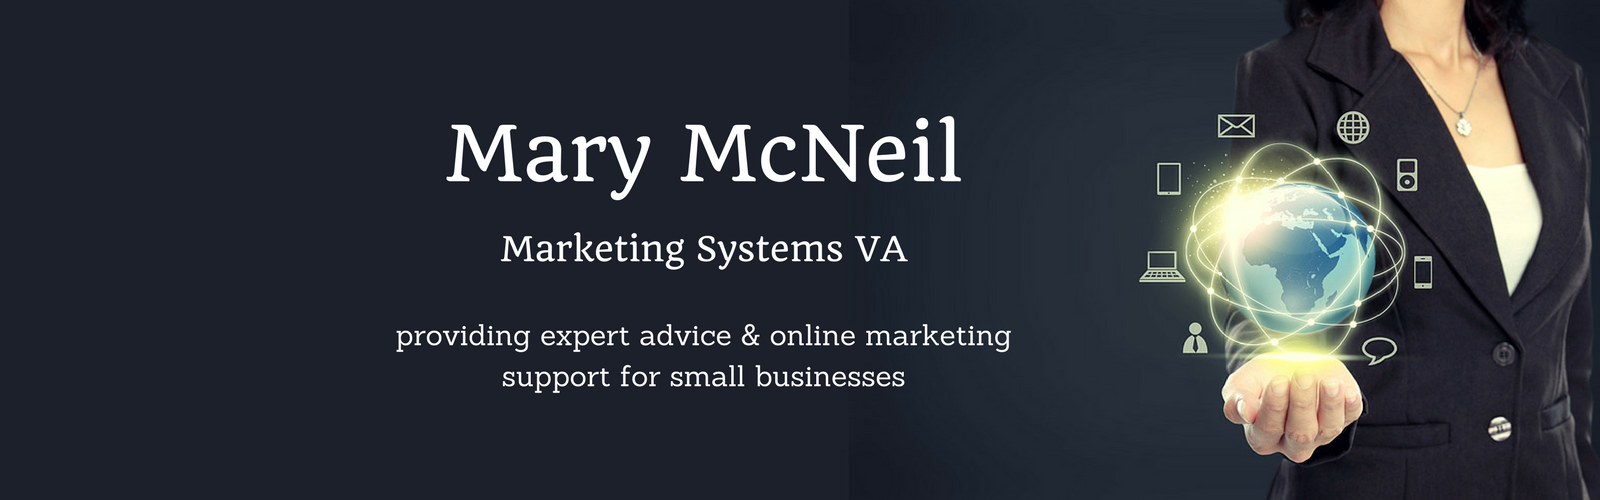 Marketing Systems VA providing hands-on marketing tech support for small businesses